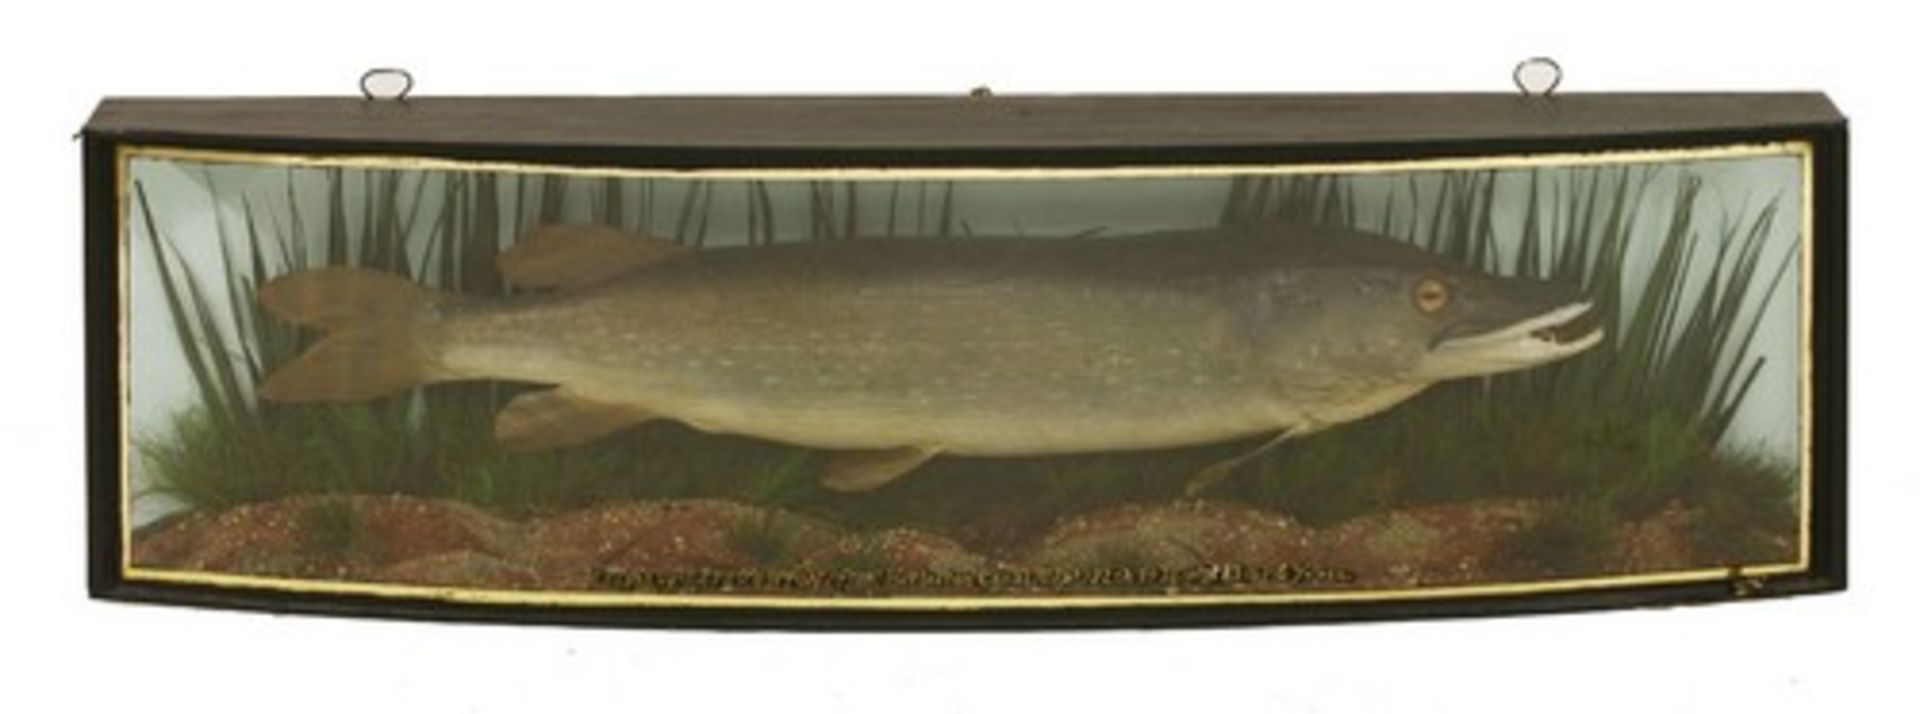 Taxidermy: A mounted pike